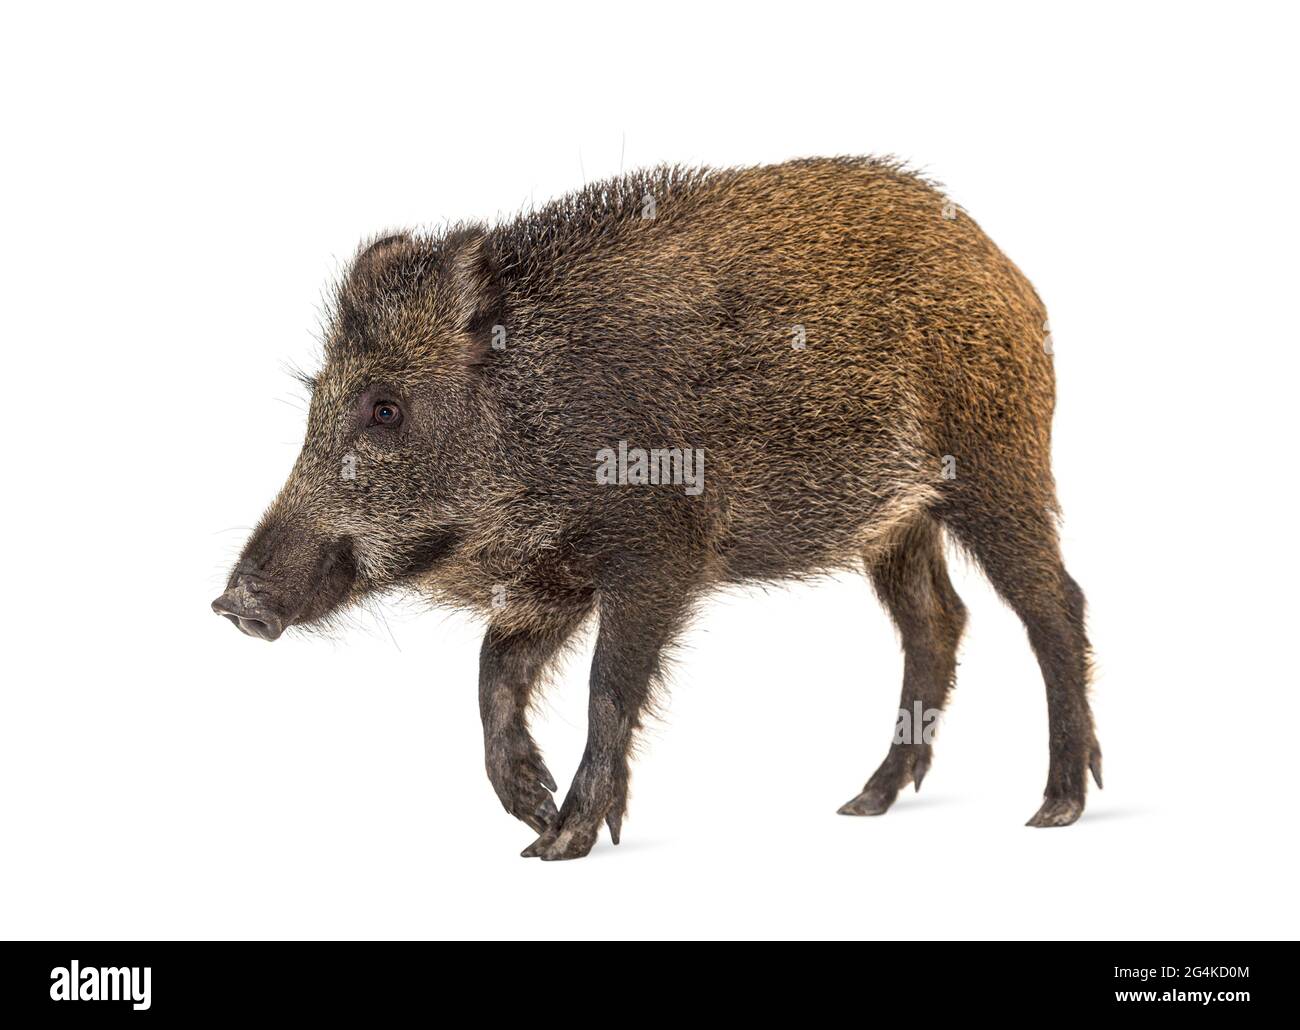 Wild boar walking in front, isolated on white Stock Photo